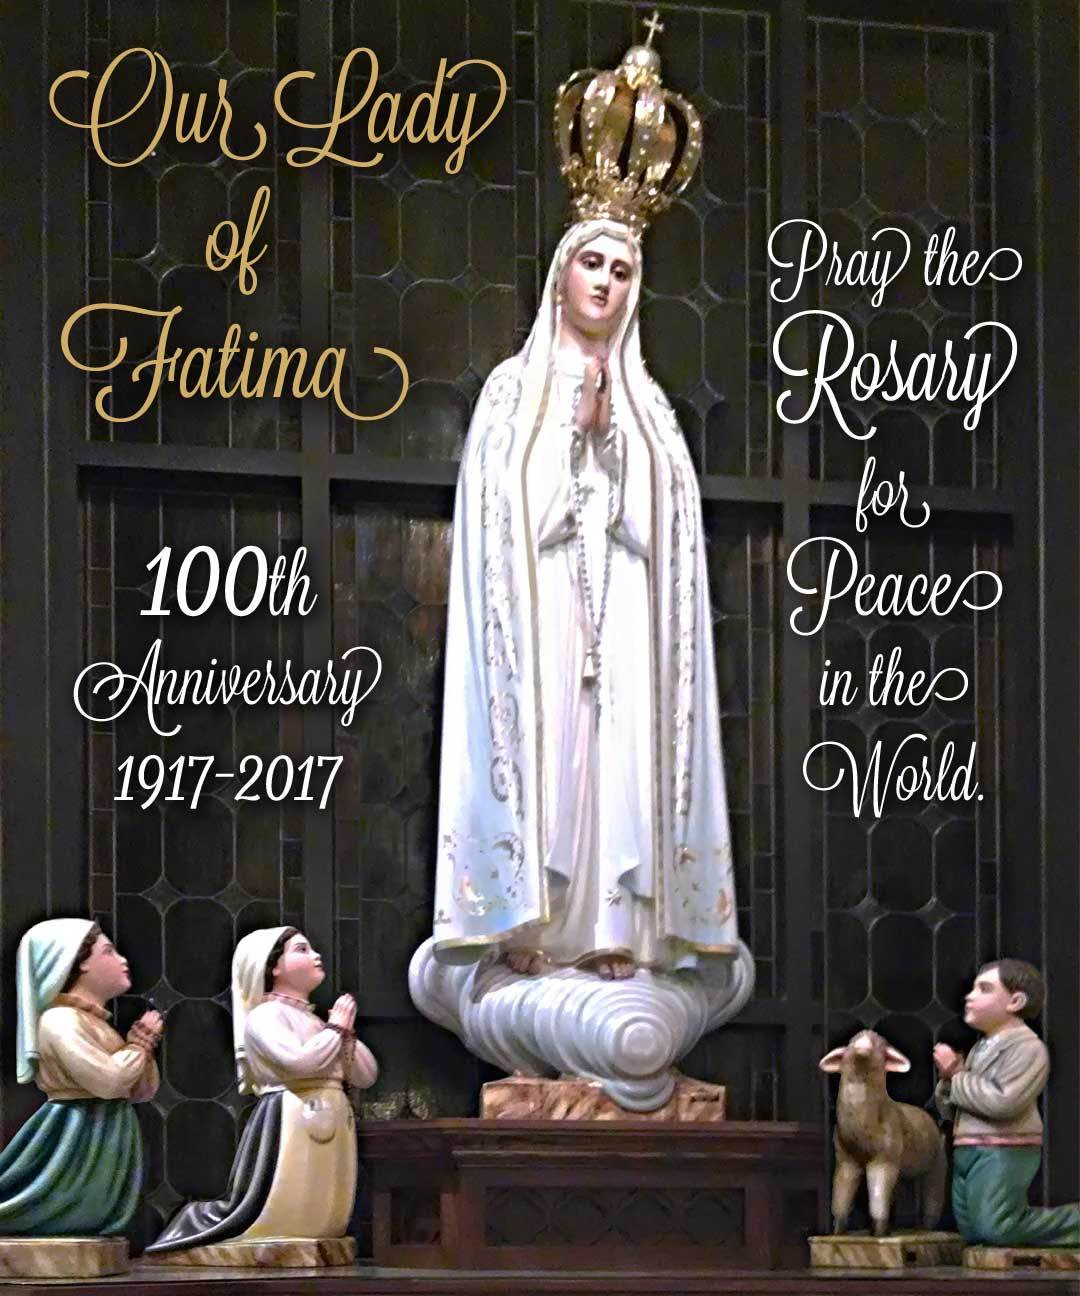 Our-Lady-of-Fatima-100-anniversary-7